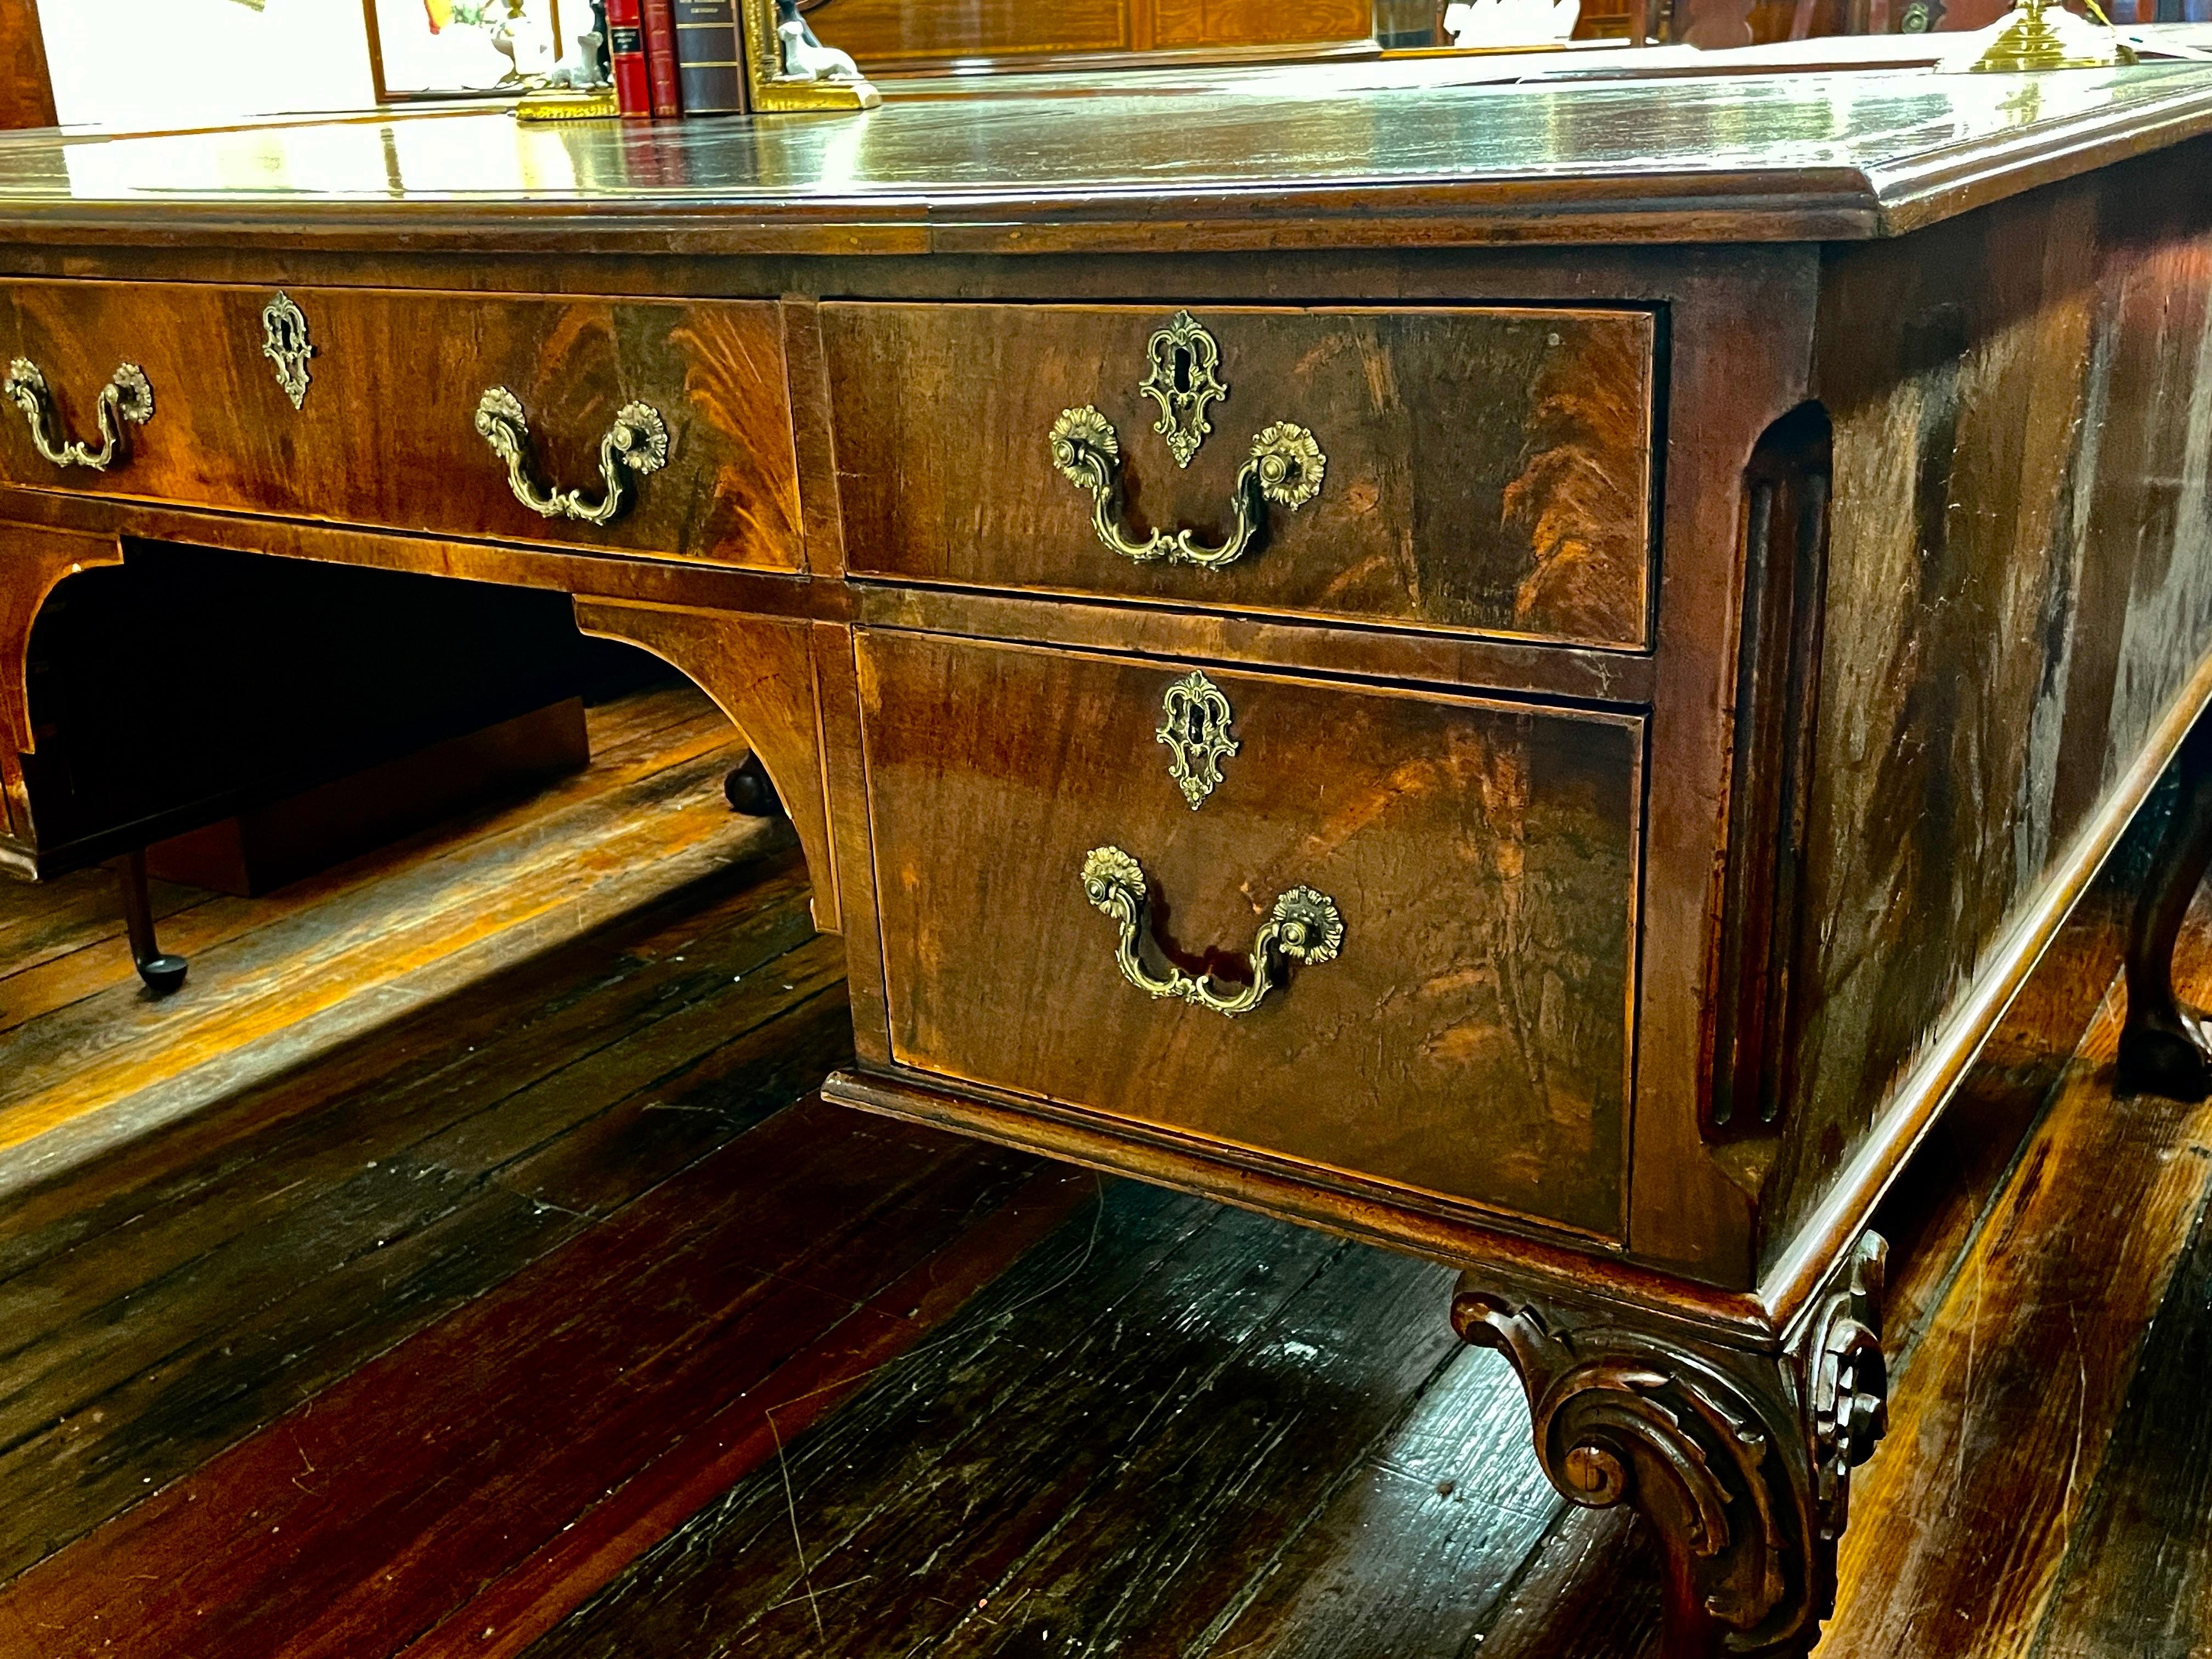 This is an extraordinary Old/Antique English highly figured flame or crotch mahogany Chippendale Style Very Large Desk.  It may be used as a partner's desk, but the back side is finished and has faux (non-working) drawers.  Its size still would